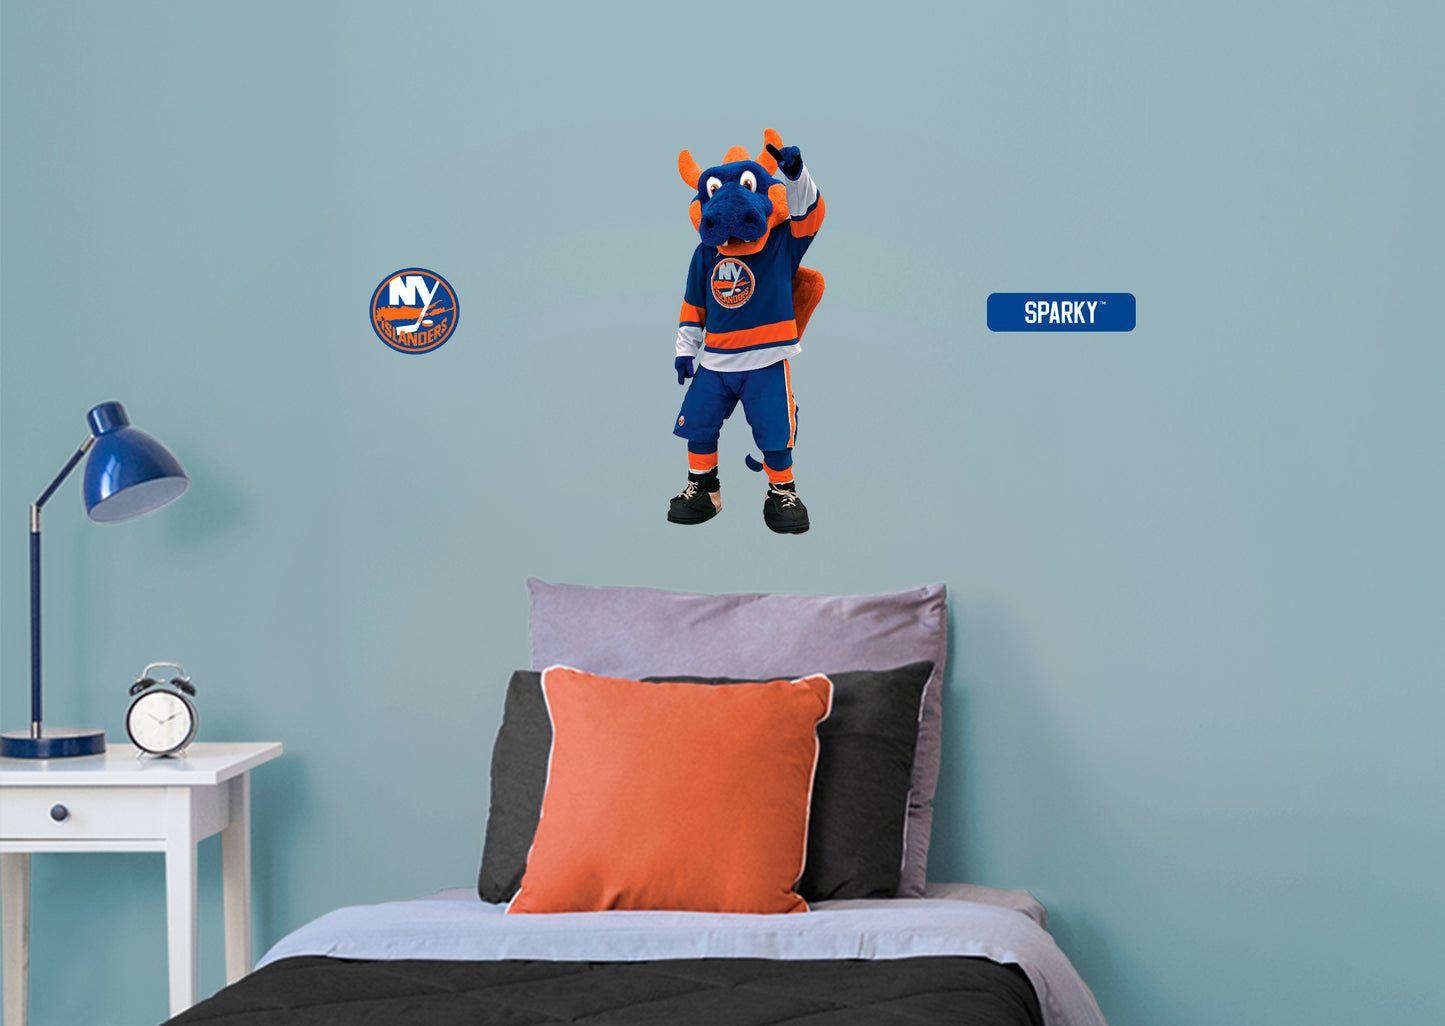 New York Islanders: Sparky 2021 Mascot        - Officially Licensed NHL Removable Wall   Adhesive Decal